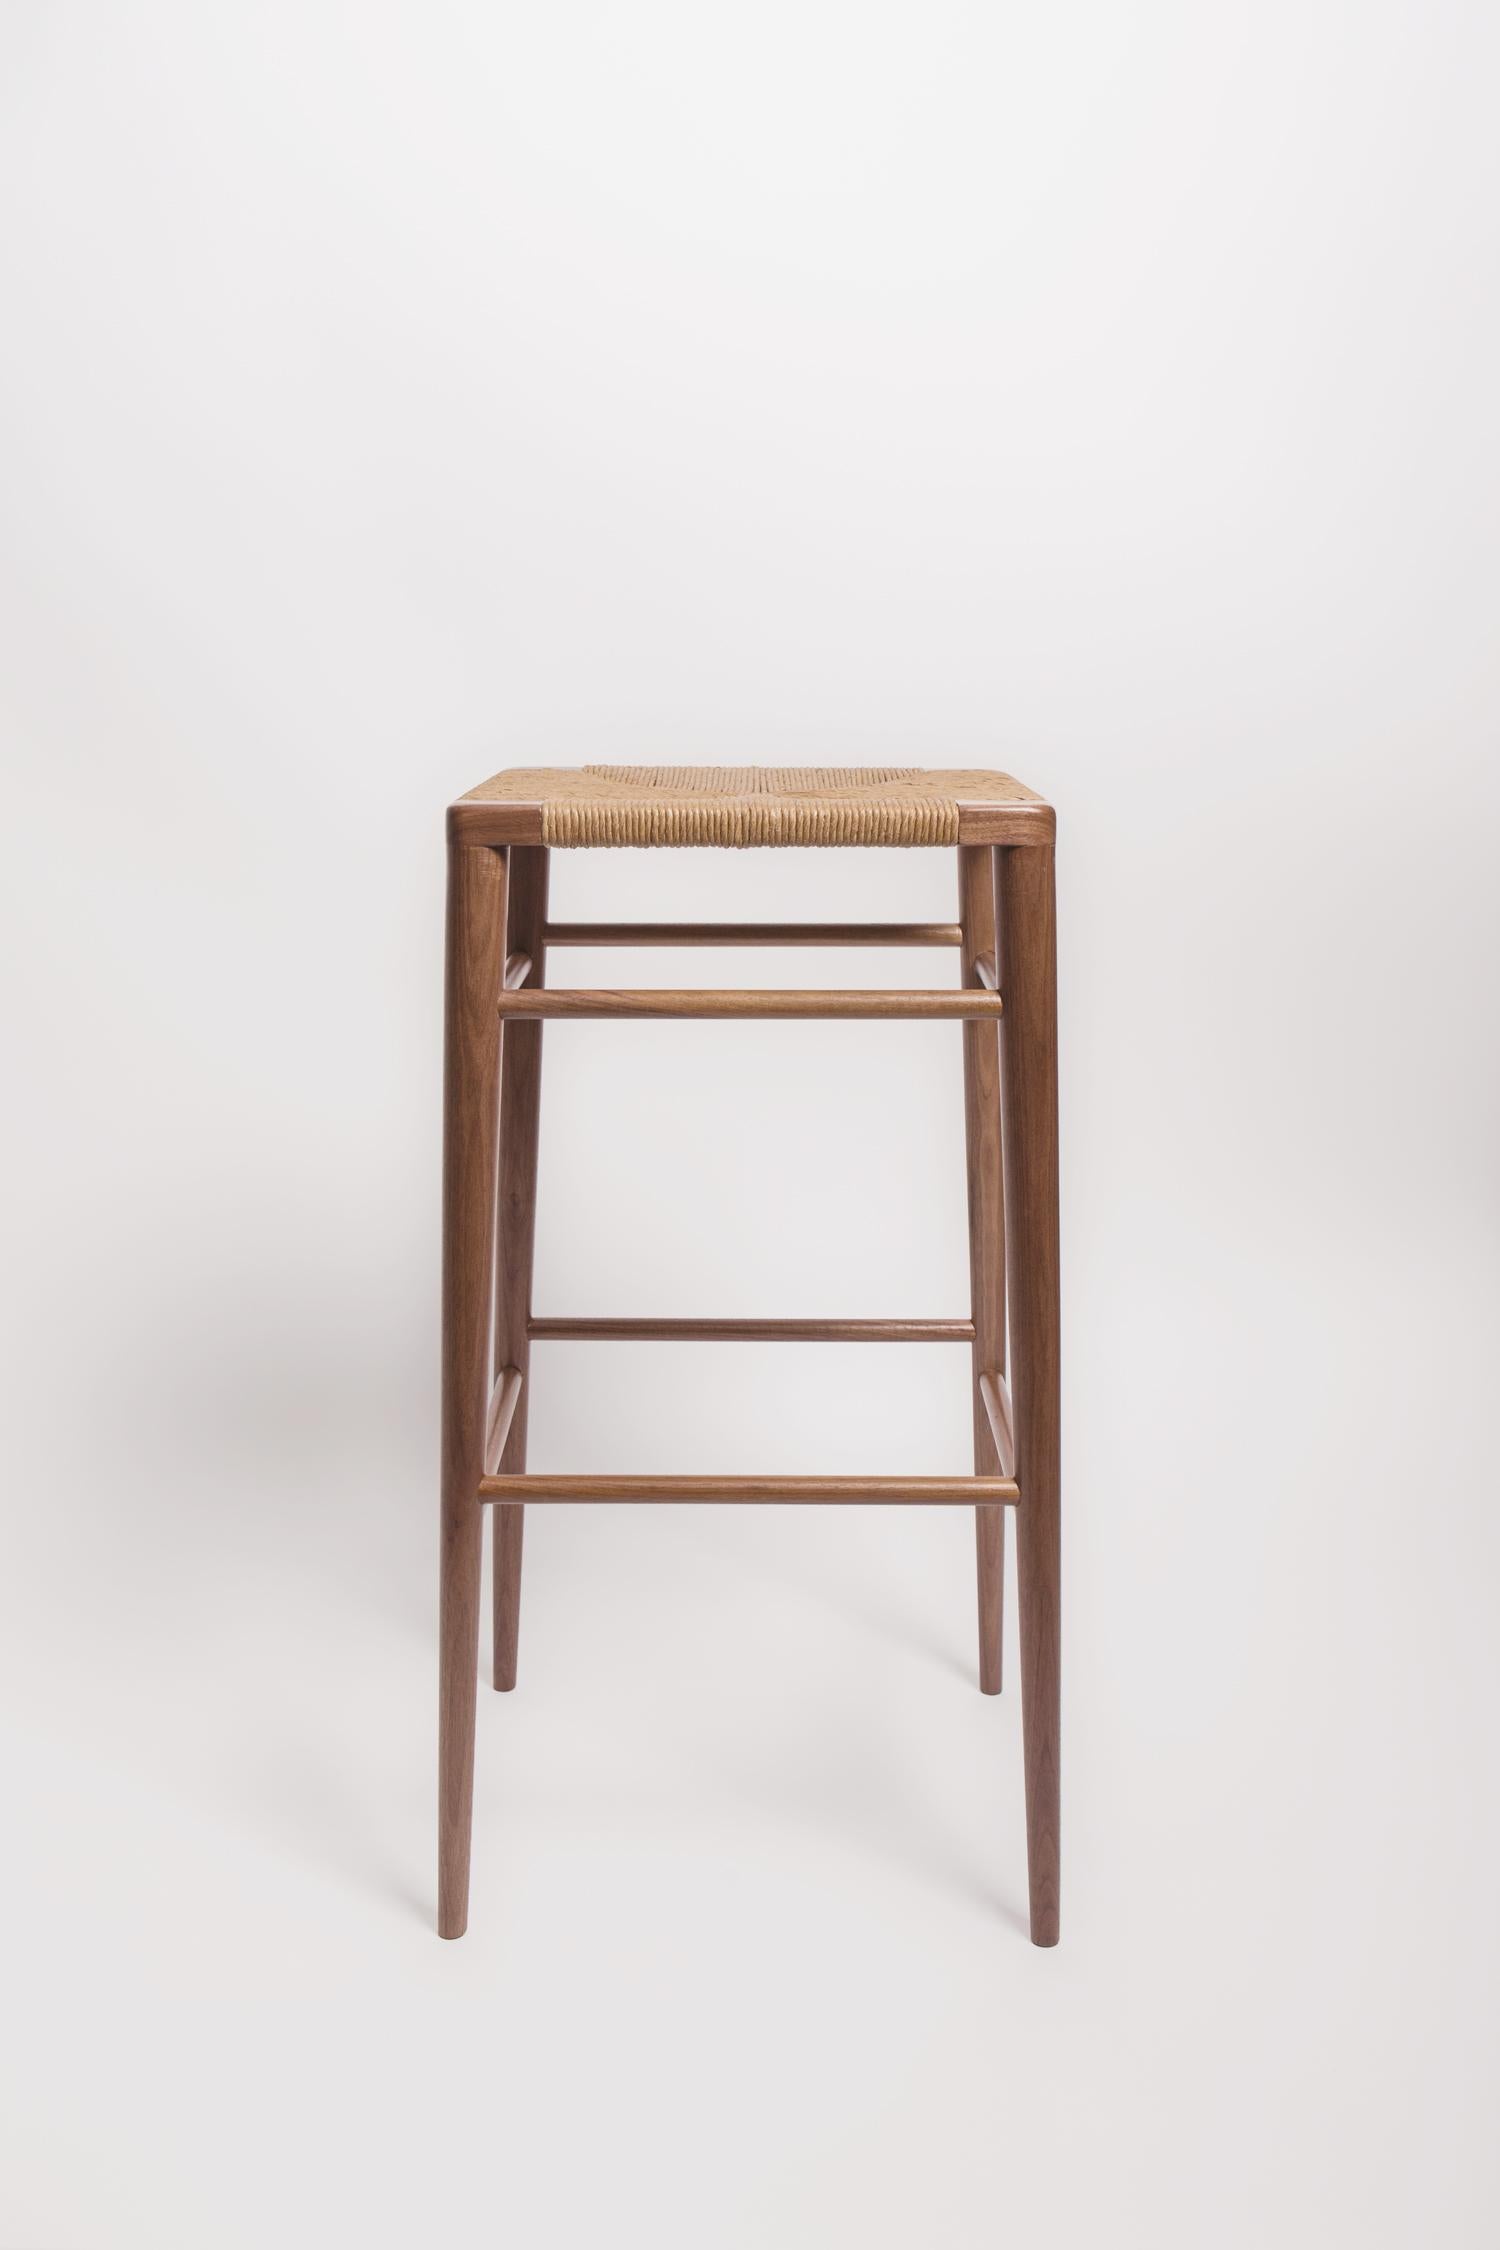 Originally designed by Mel Smilow in 1956 and officially reintroduced by his daughter Judy Smilow in 2013, the Woven Rush Bar Stool is classically midcentury. This collection’s handwoven seating and handcrafted wooden frame provide a comfortable and